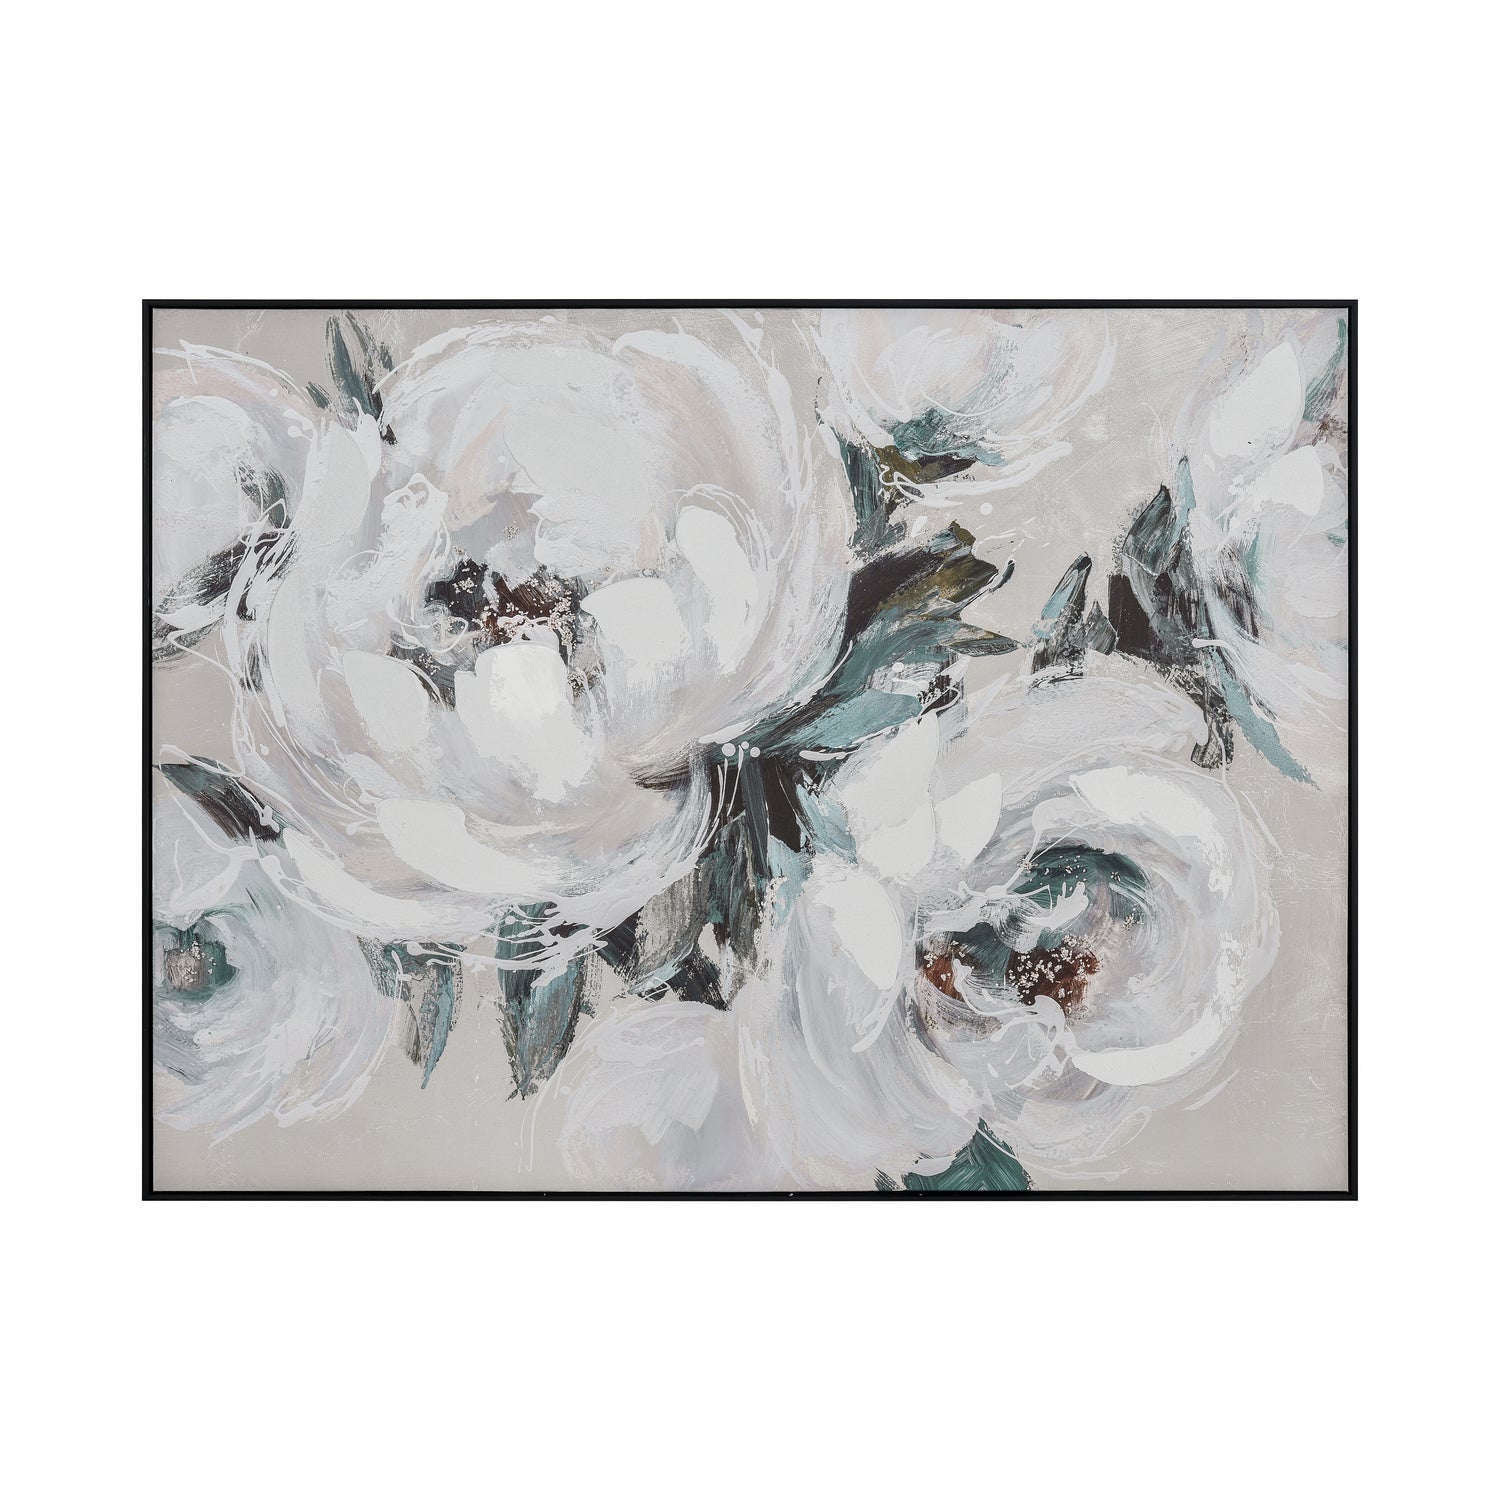 ELK Home - S0056-10623 - Framed Wall Art - Blossom Abstract - Off White